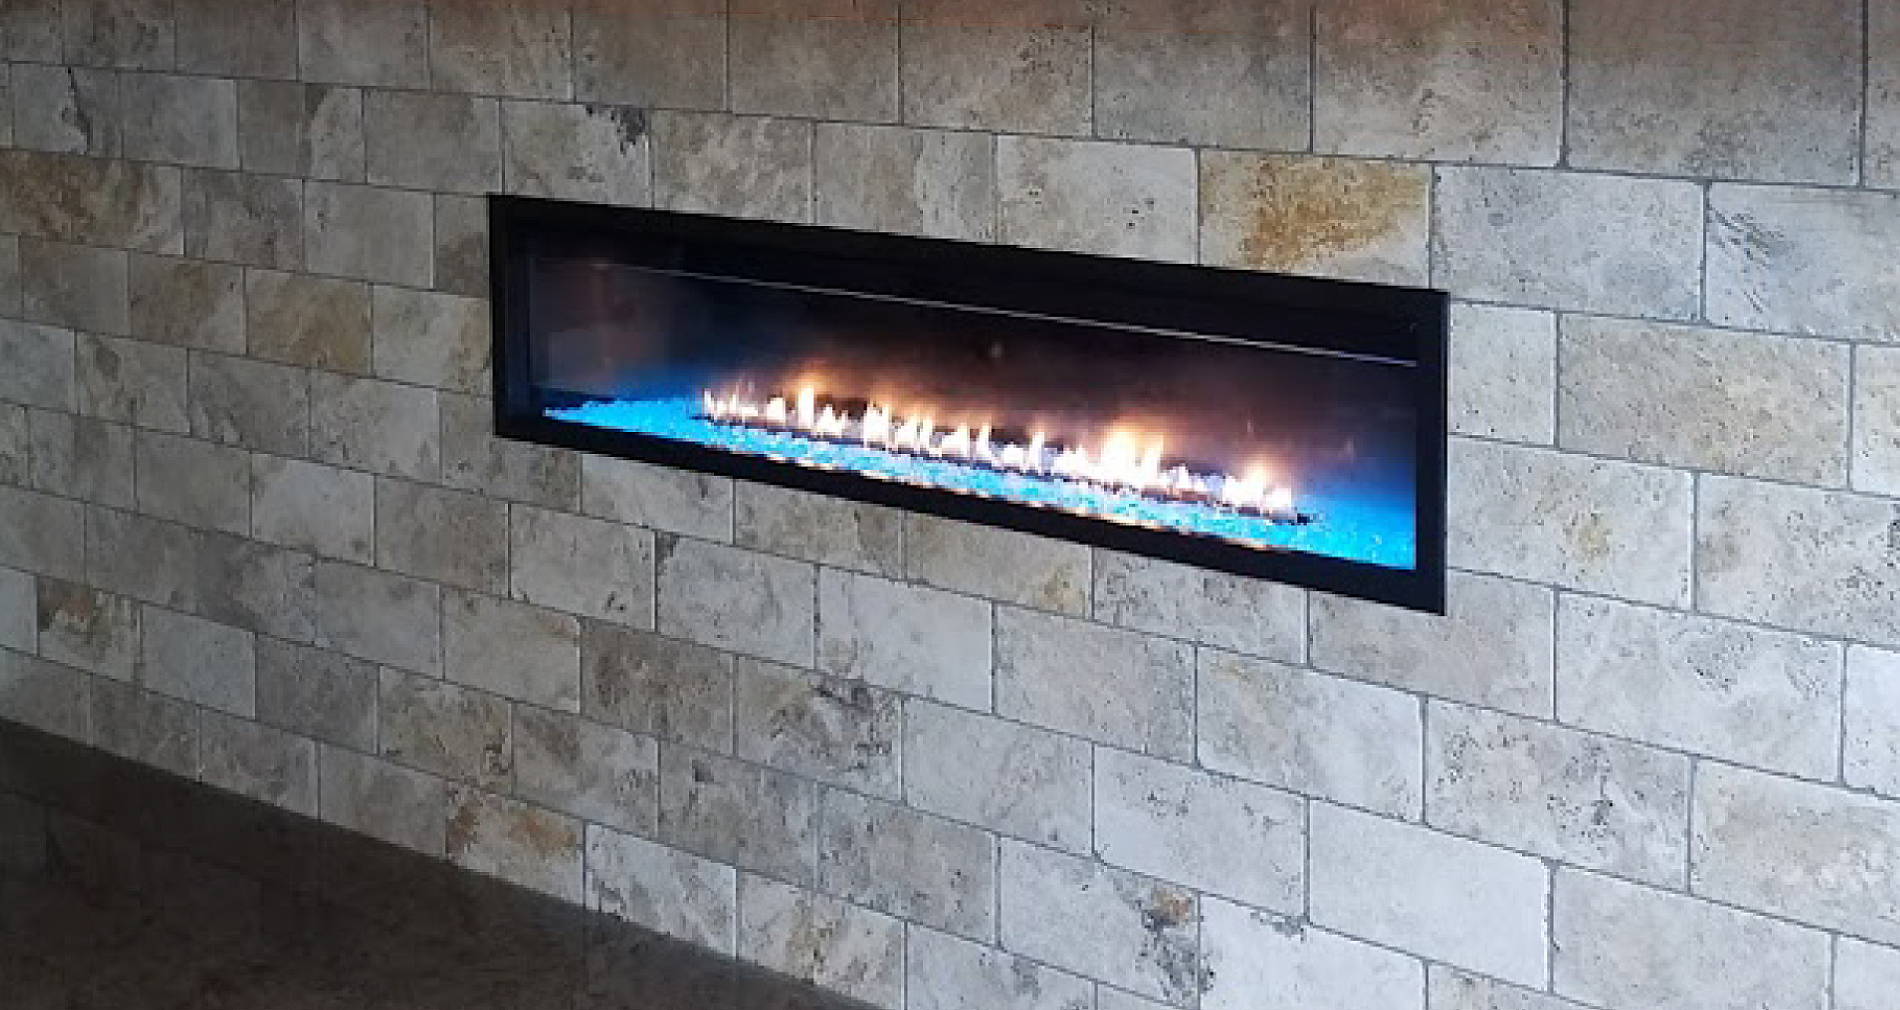 Fireplace renovation before and after